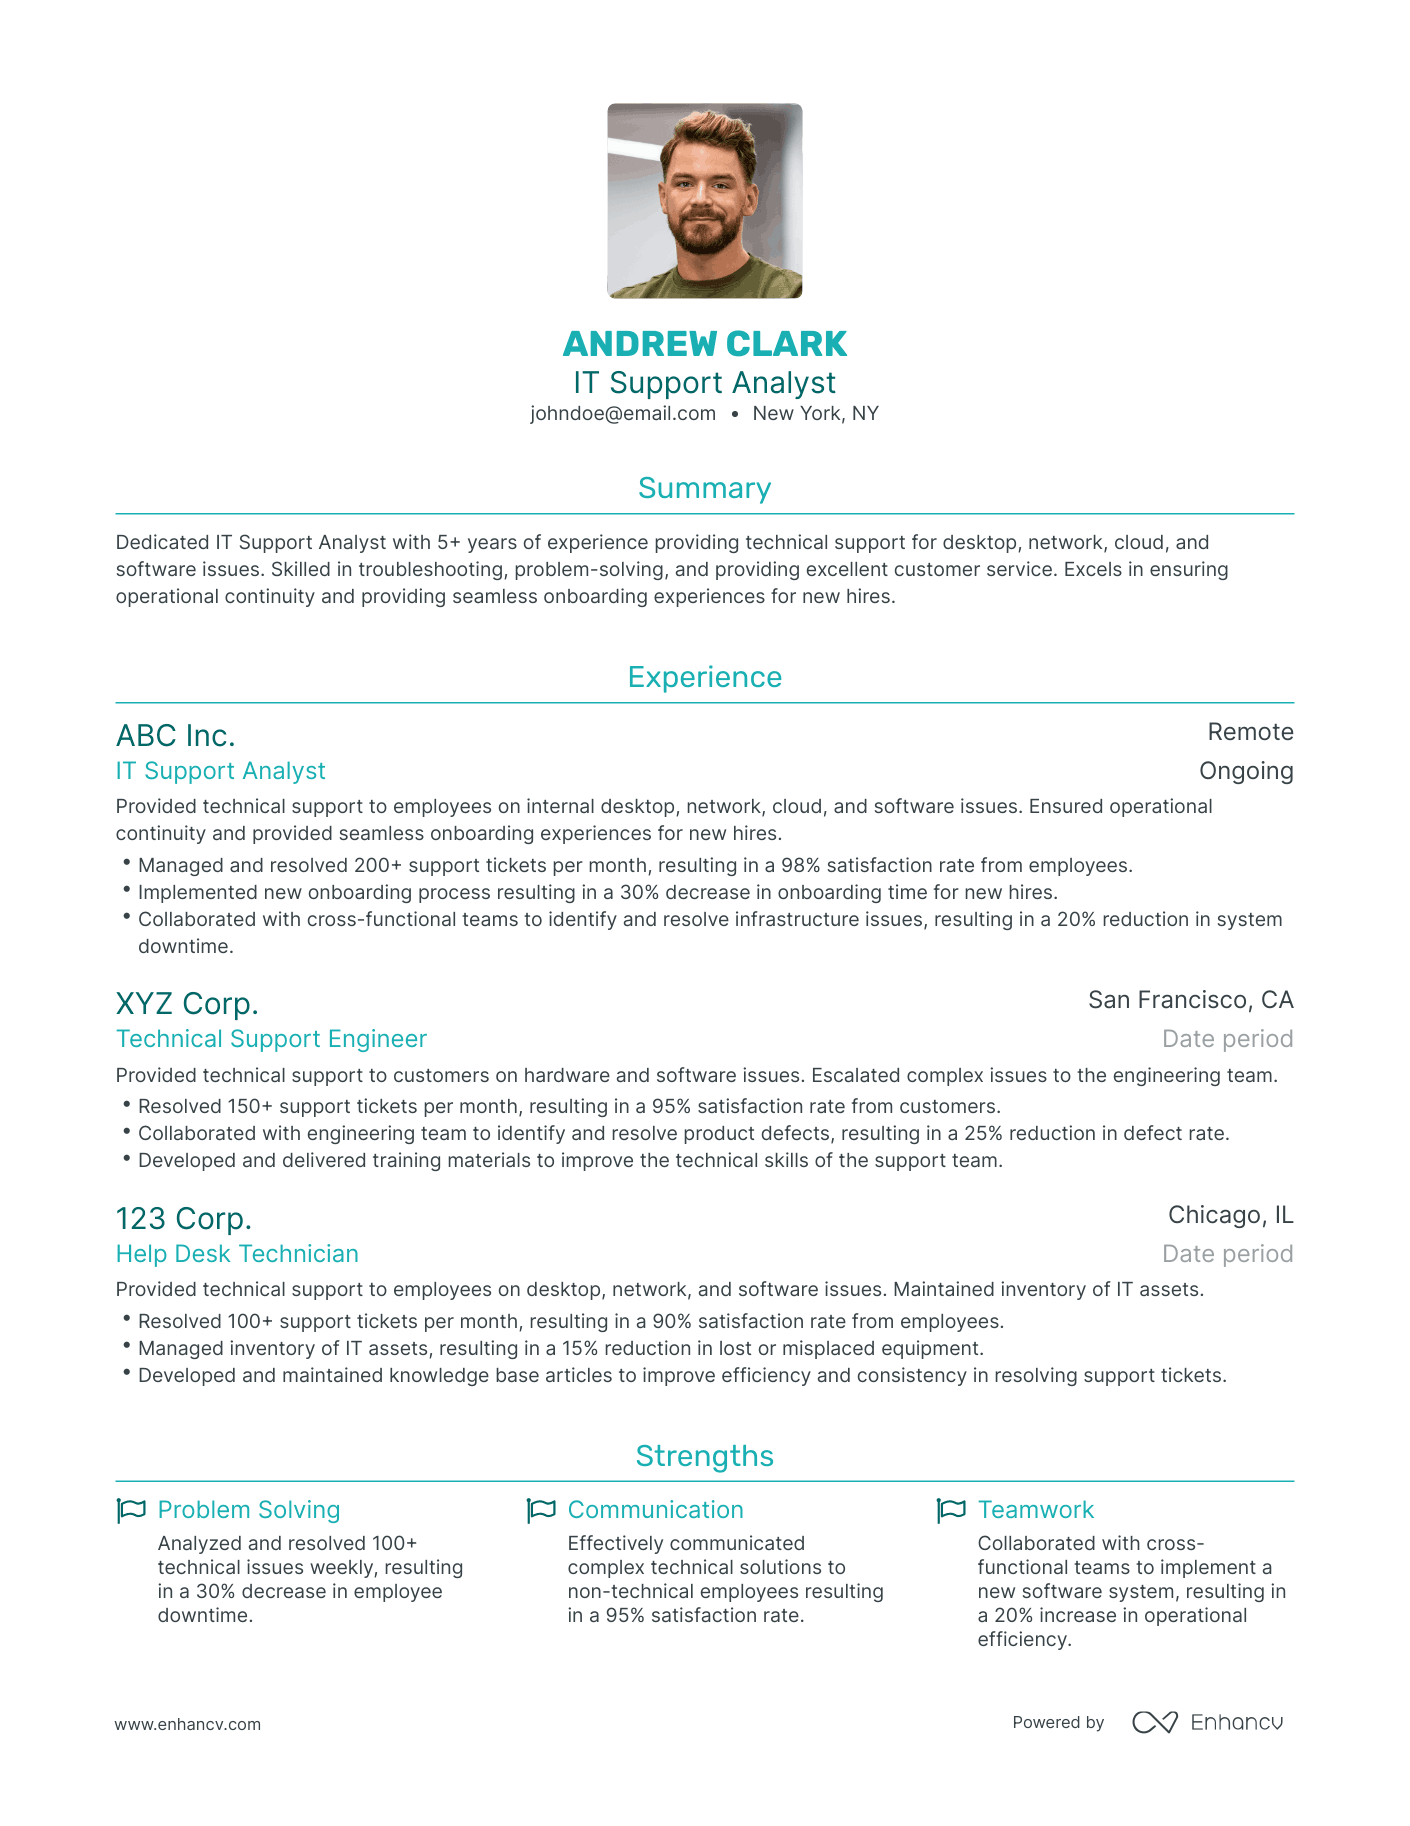 Traditional IT Support Analyst Resume Template